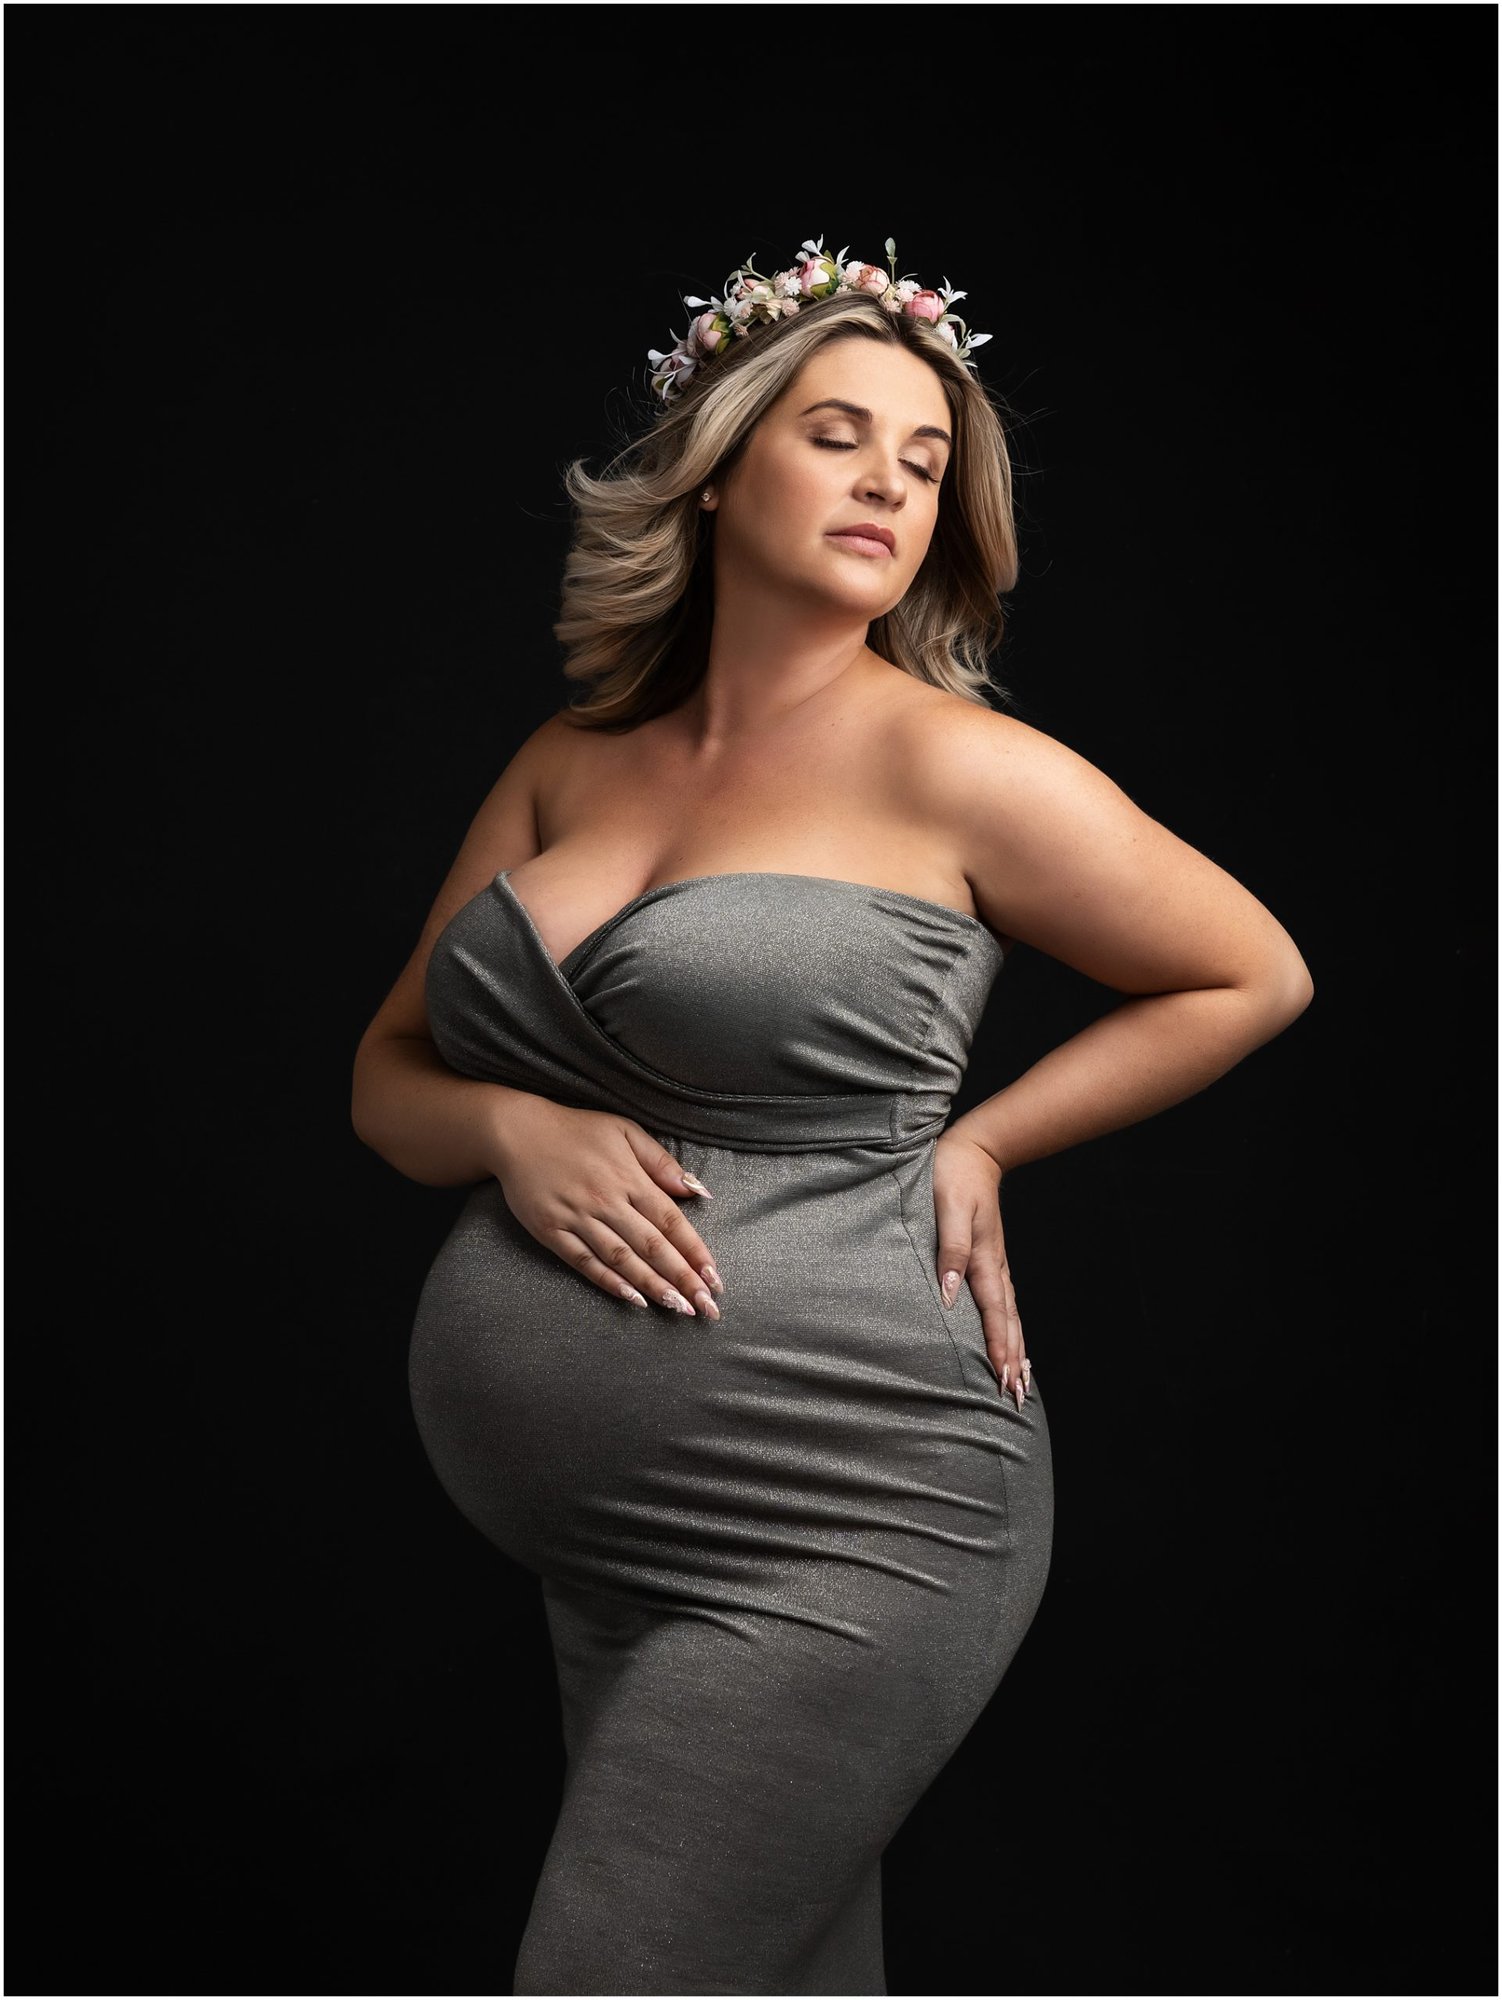 Pregnant lady in silver dress and crown poses during maternity photoshoot with Suffolk Photographer Alison McKenny